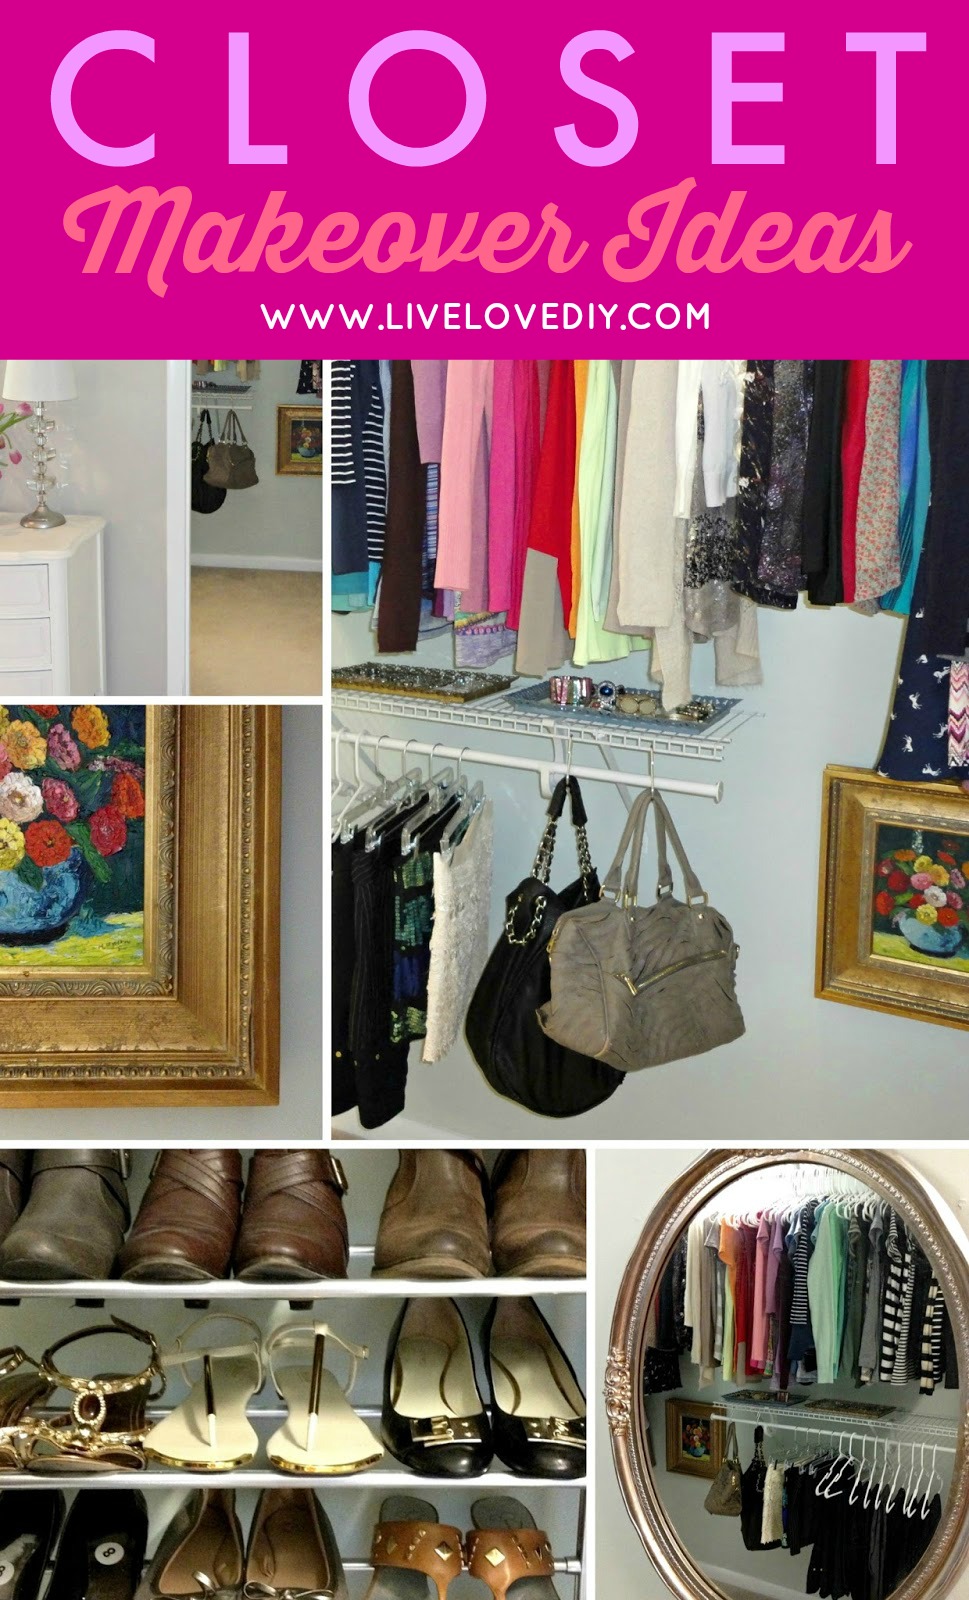 HOW TO HAVE A CLOSET FULL OF CLOTHES YOU LOVE + WEAR: STEP 1, CLEAN OUT  YOUR CLOSET - RAE ANN KELLY